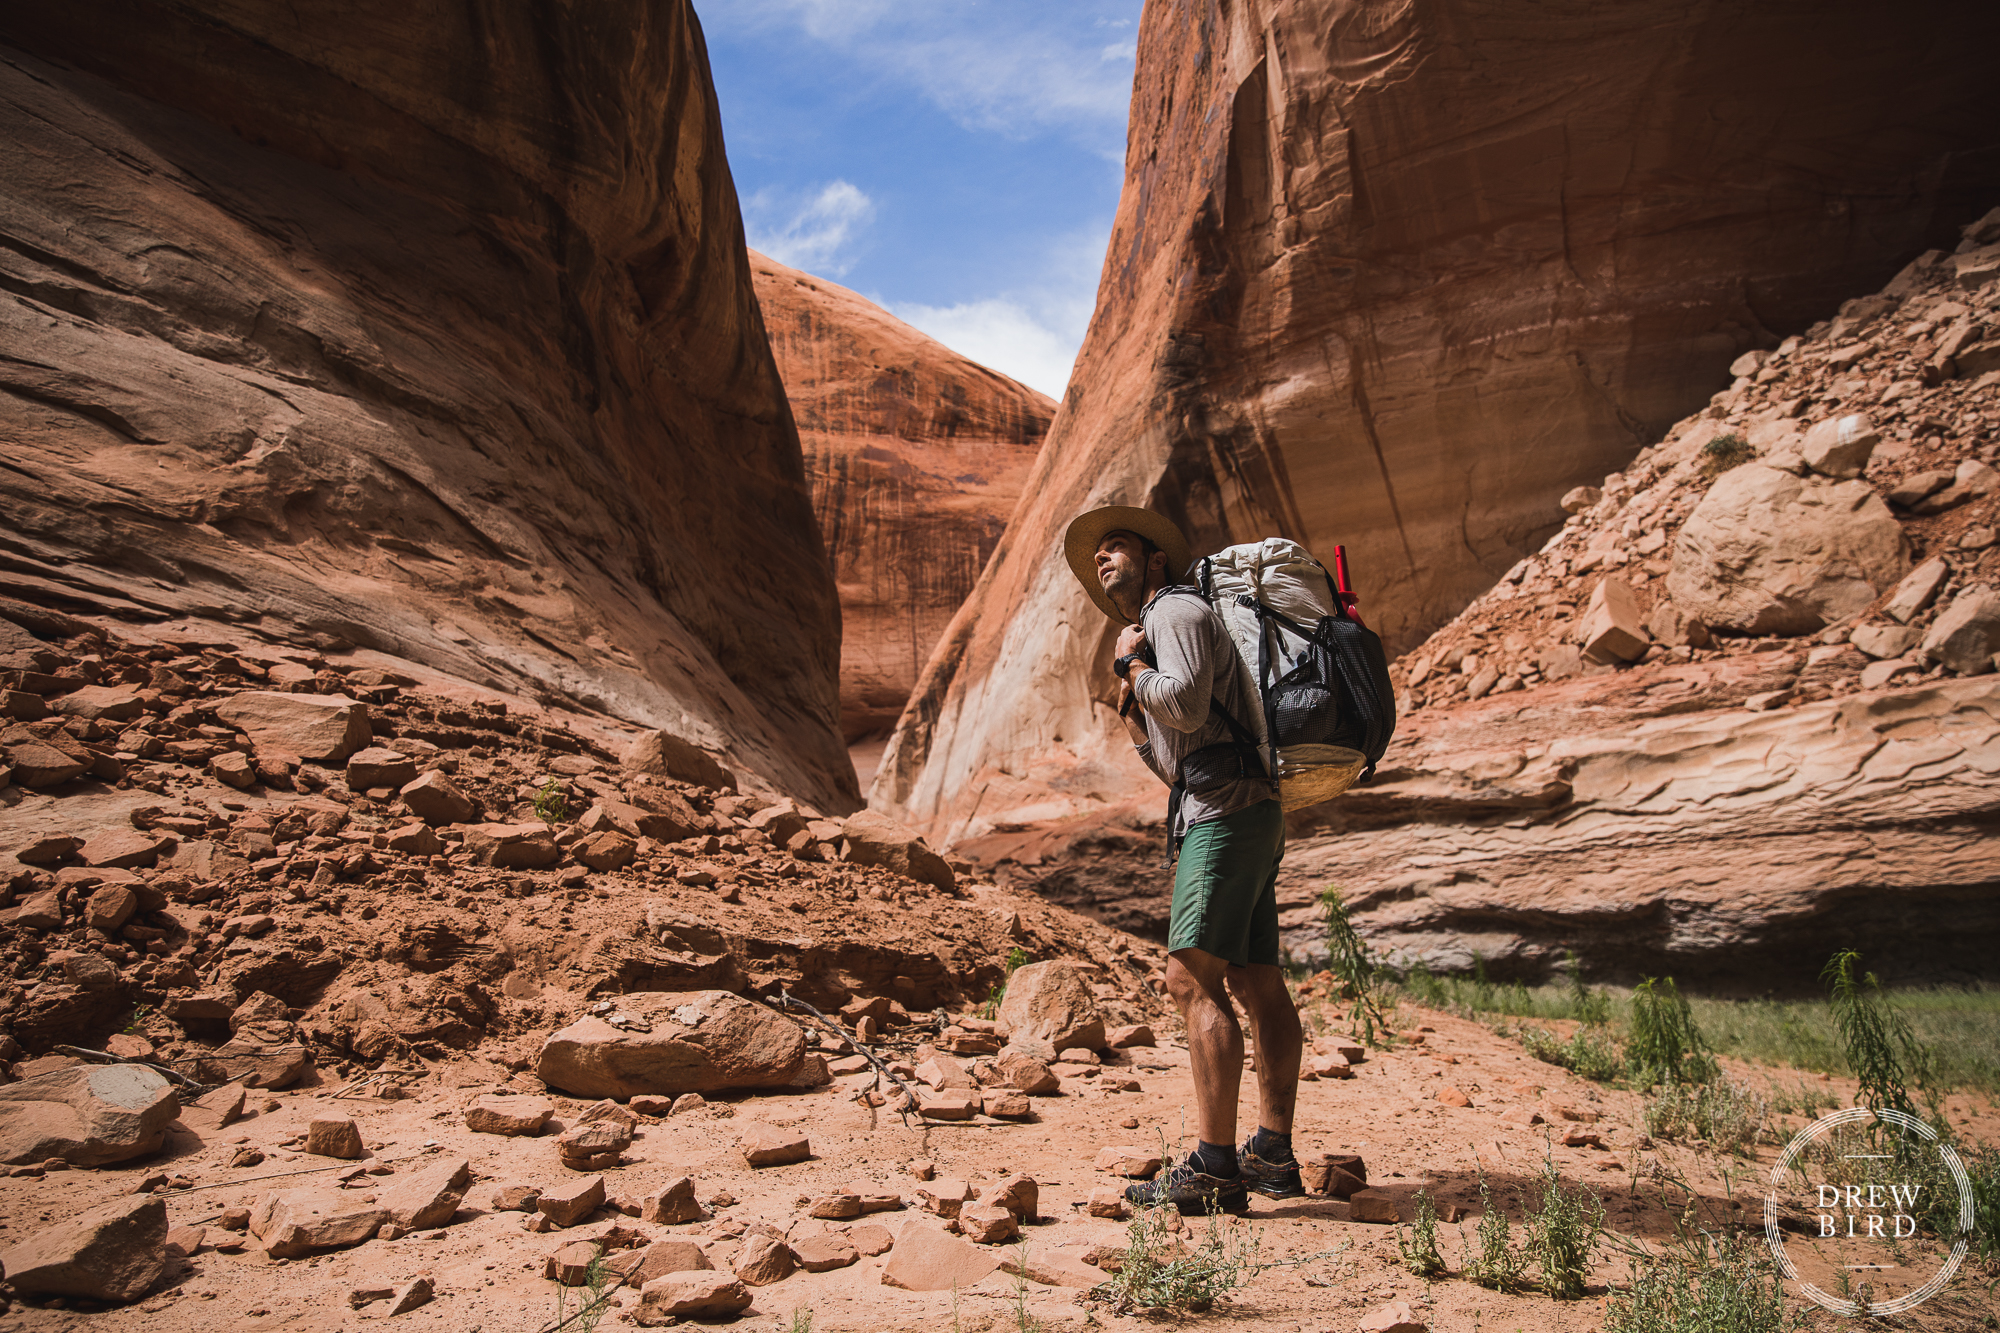 A backpacker stands in a slot canyon in Southern Utah surrounded by redrocks. Adventure photography for Alpaka Packrafts.